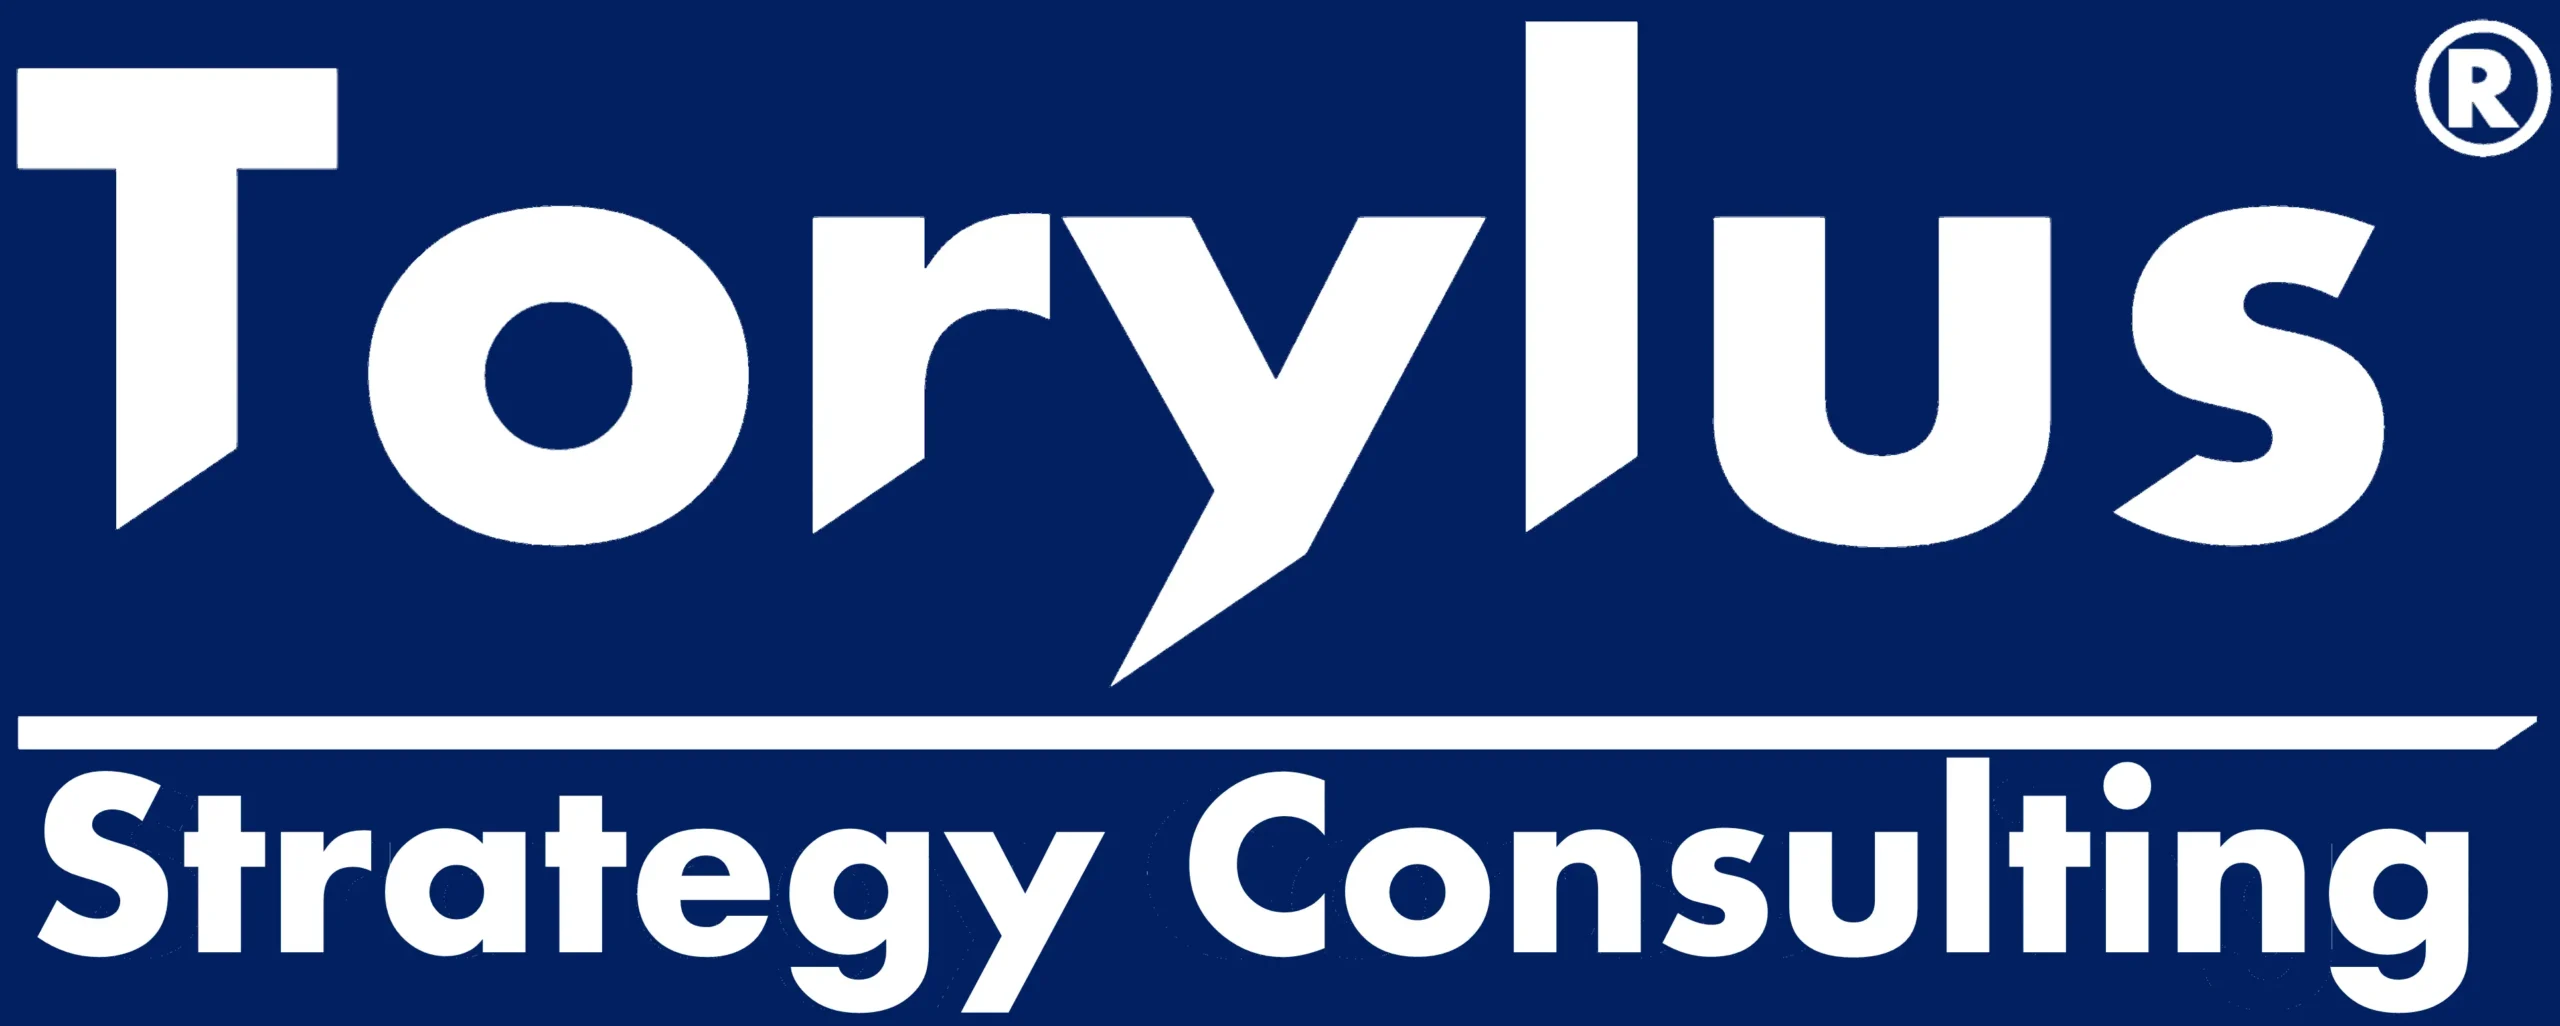 Torylus Strategy Consulting